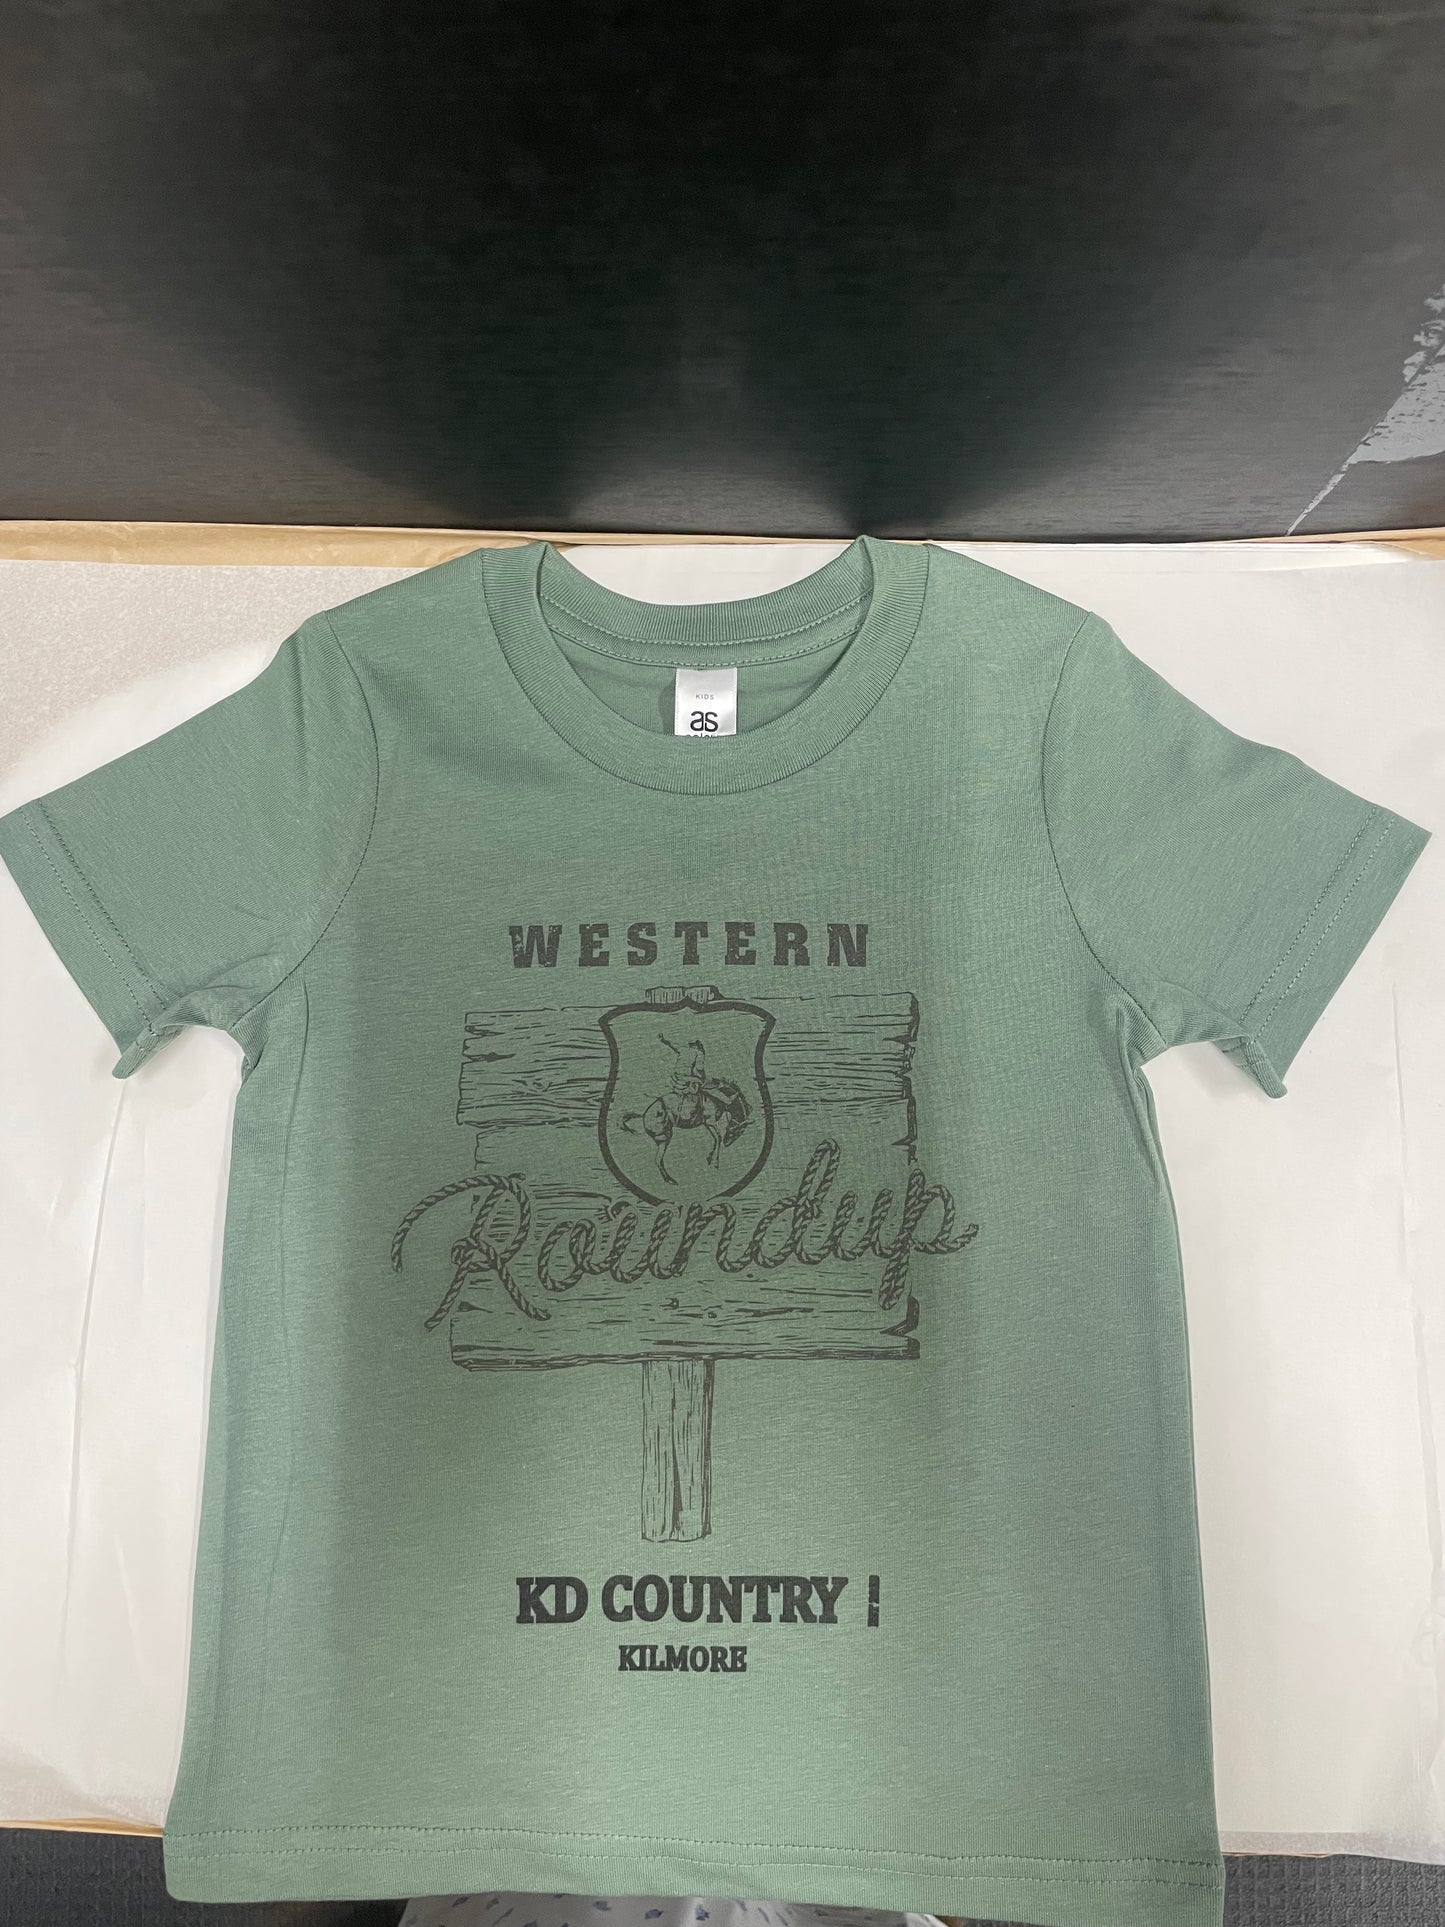 KD Country Tee Kids Western Round Up